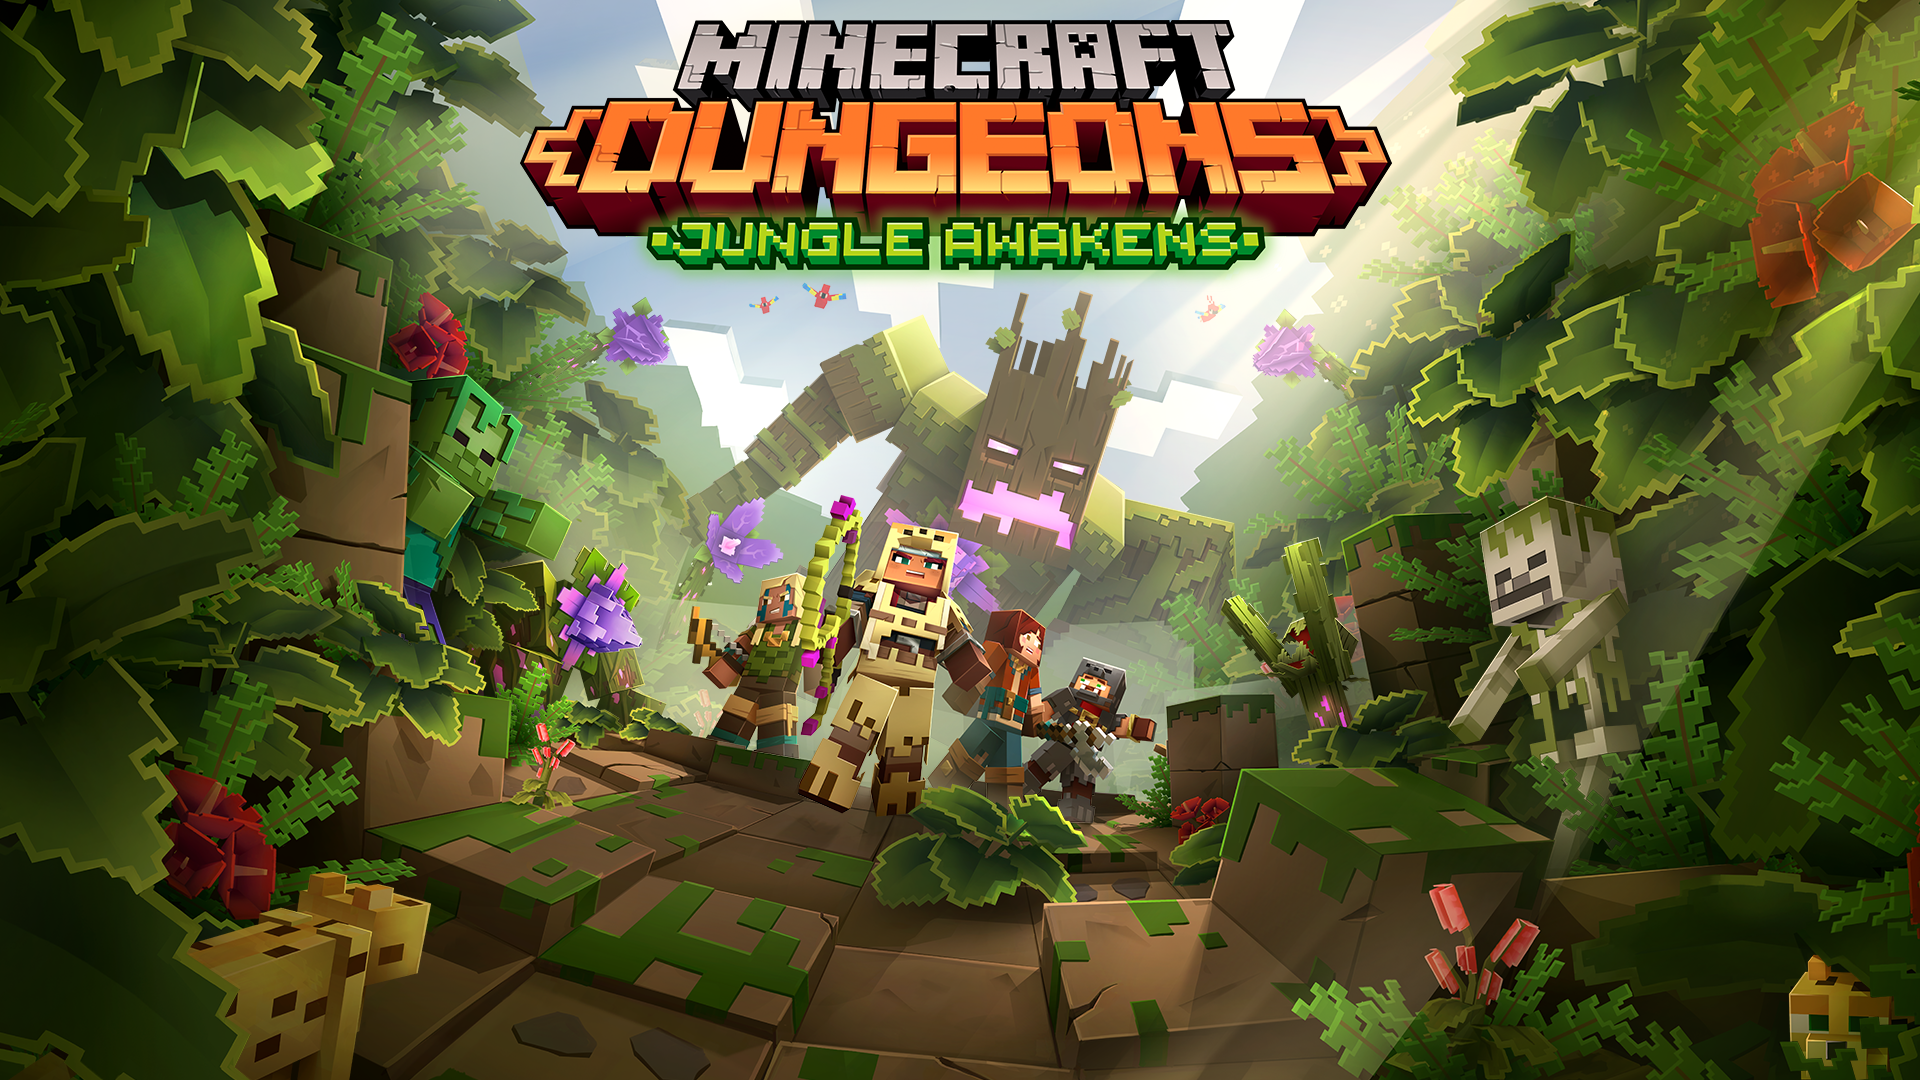 Coming Soon to Xbox Game Pass for PC: Minecraft Dungeons, Alan Wake,  Cities: Skylines, and Plebby Quest - Xbox Wire